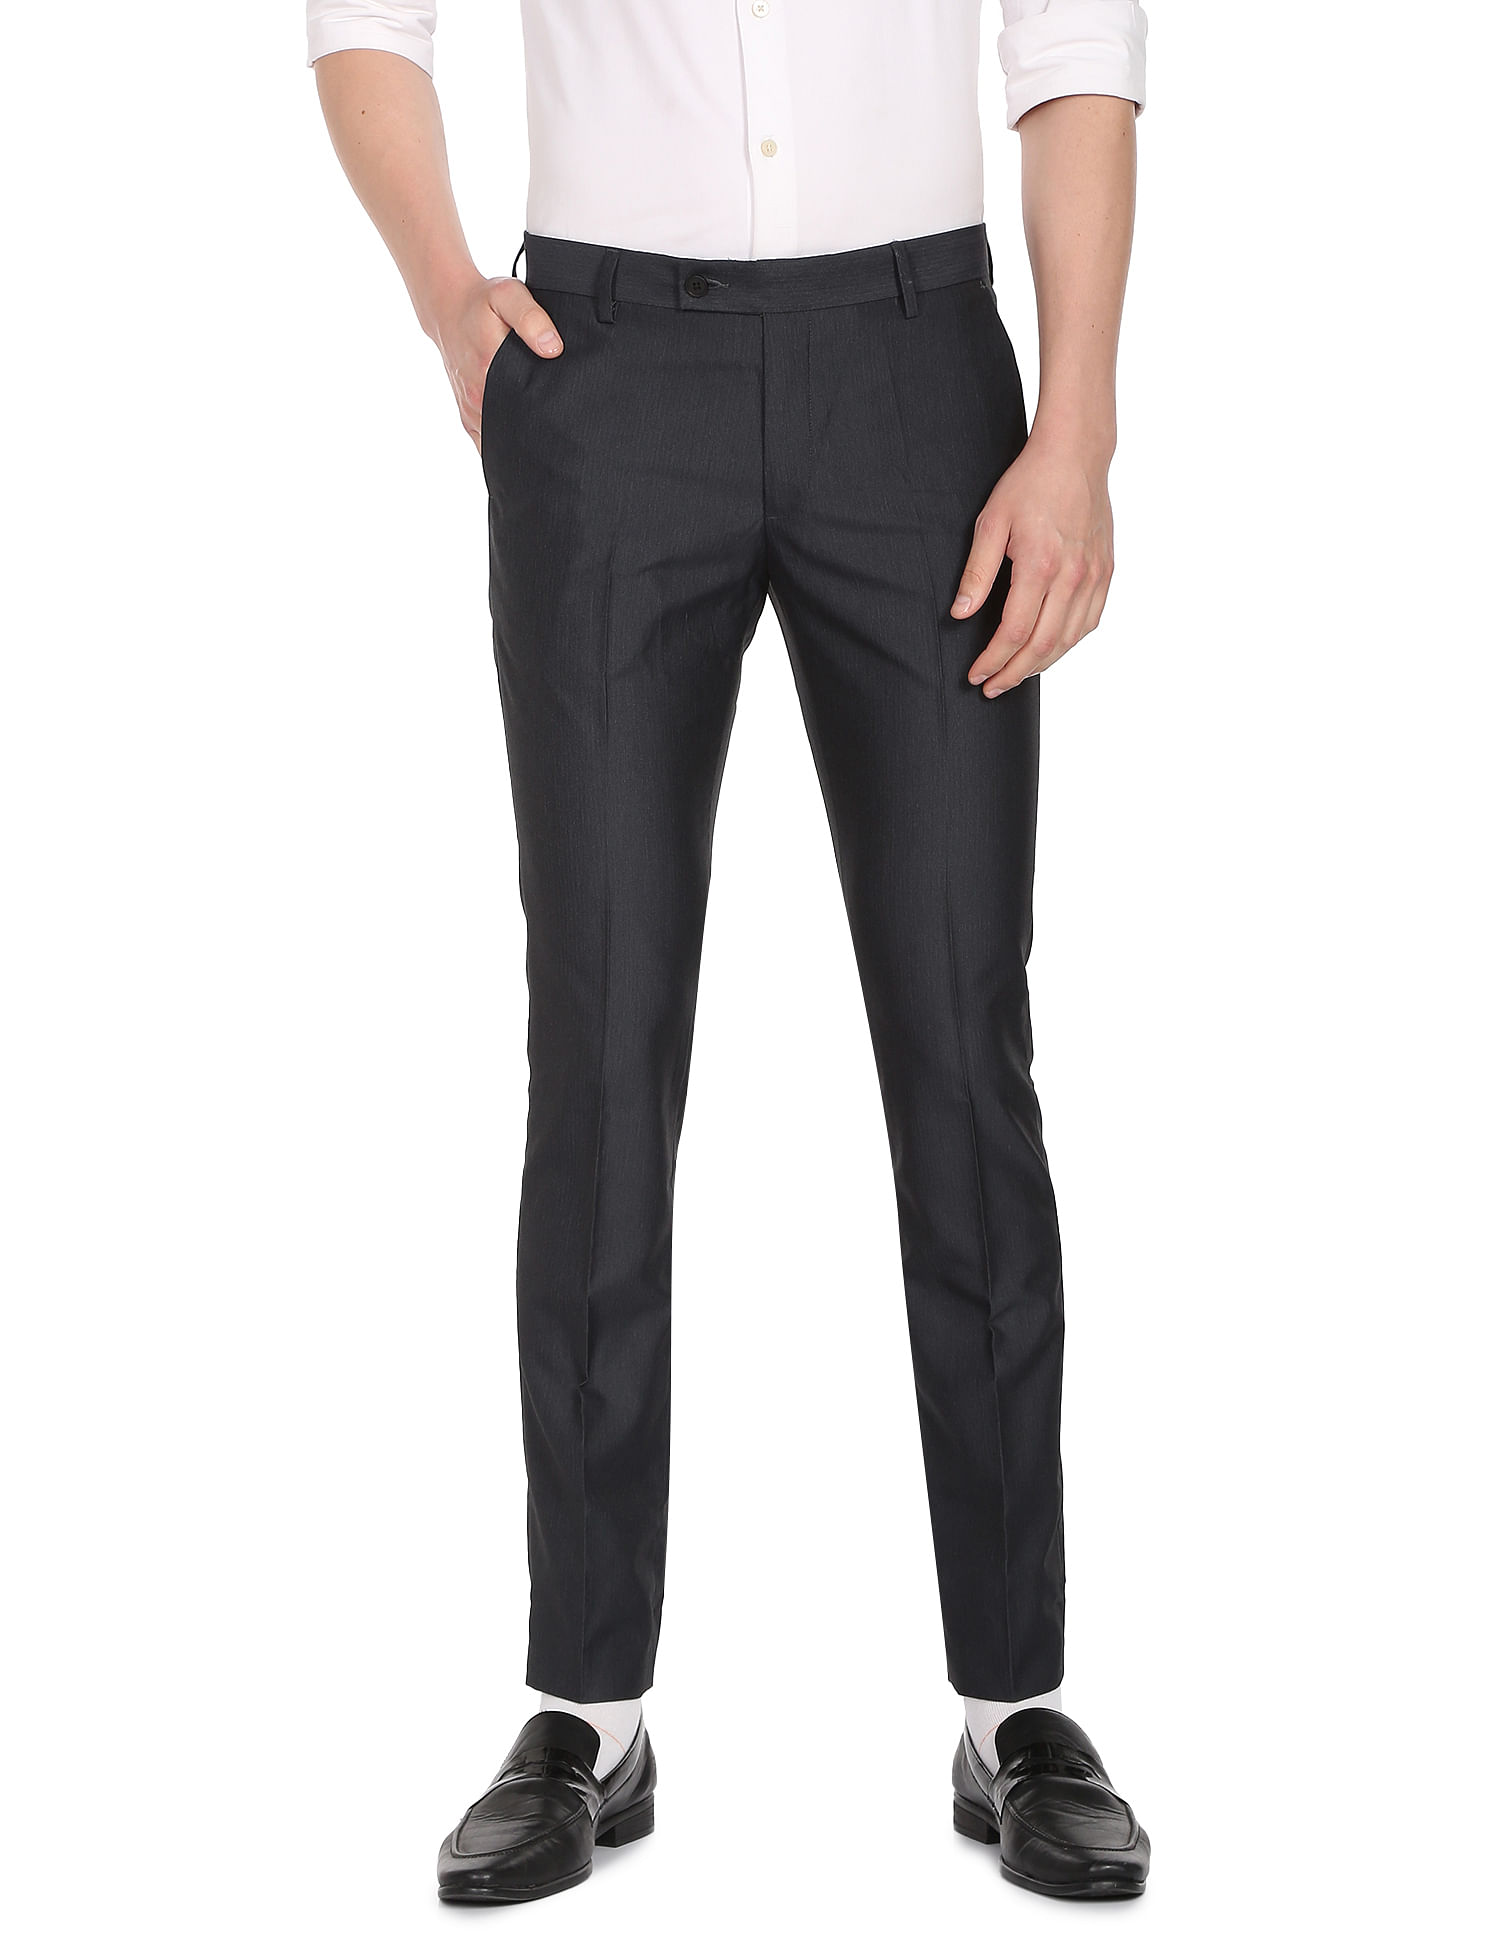 Everyday Skinny Formal Trousers  Black  verycouk